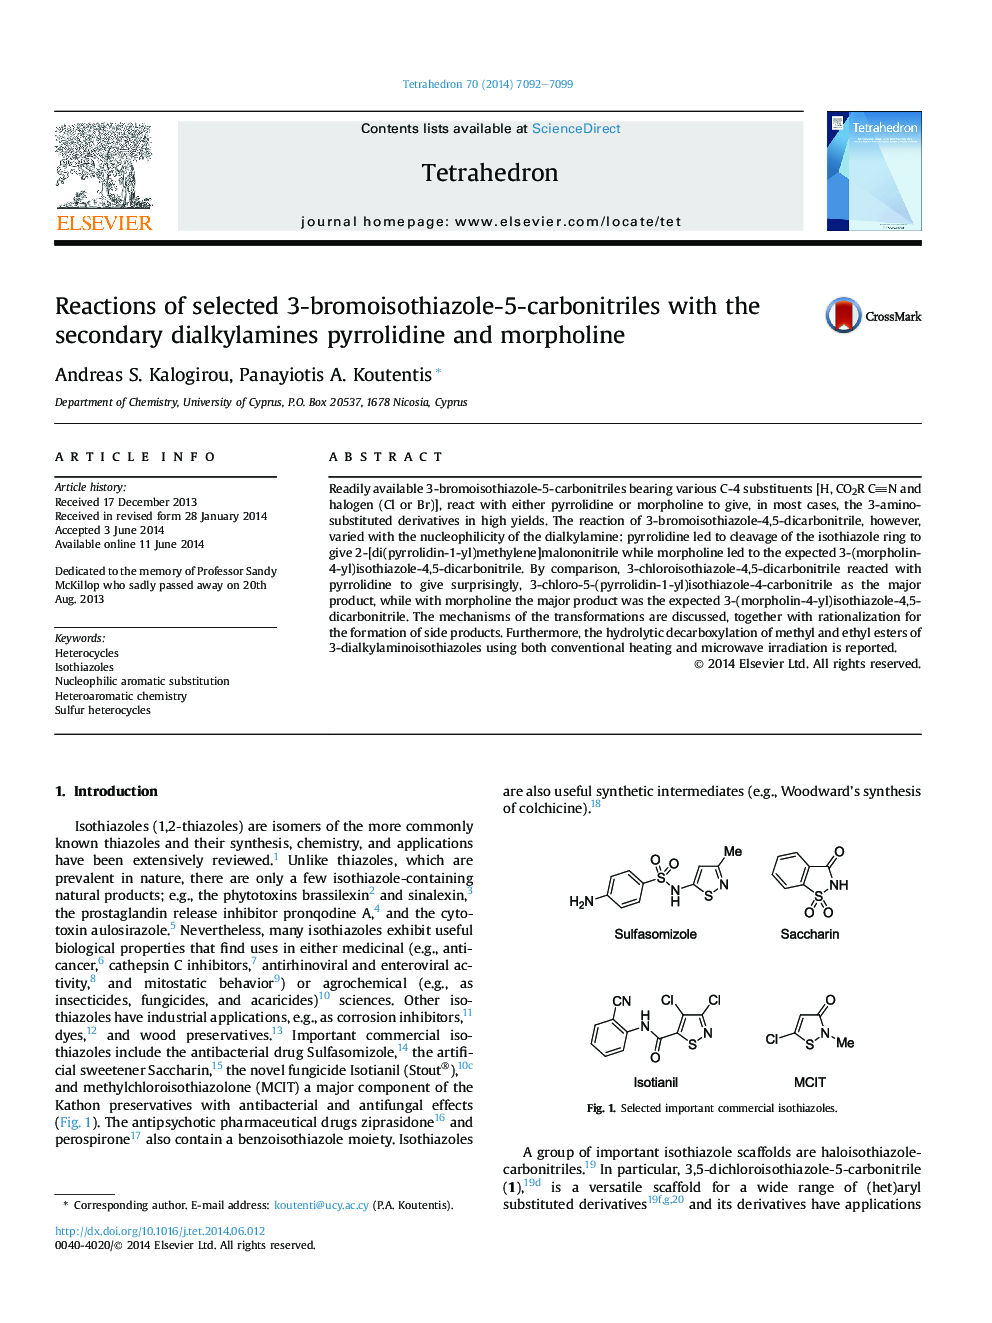 Reactions of selected 3-bromoisothiazole-5-carbonitriles with the secondary dialkylamines pyrrolidine and morpholine